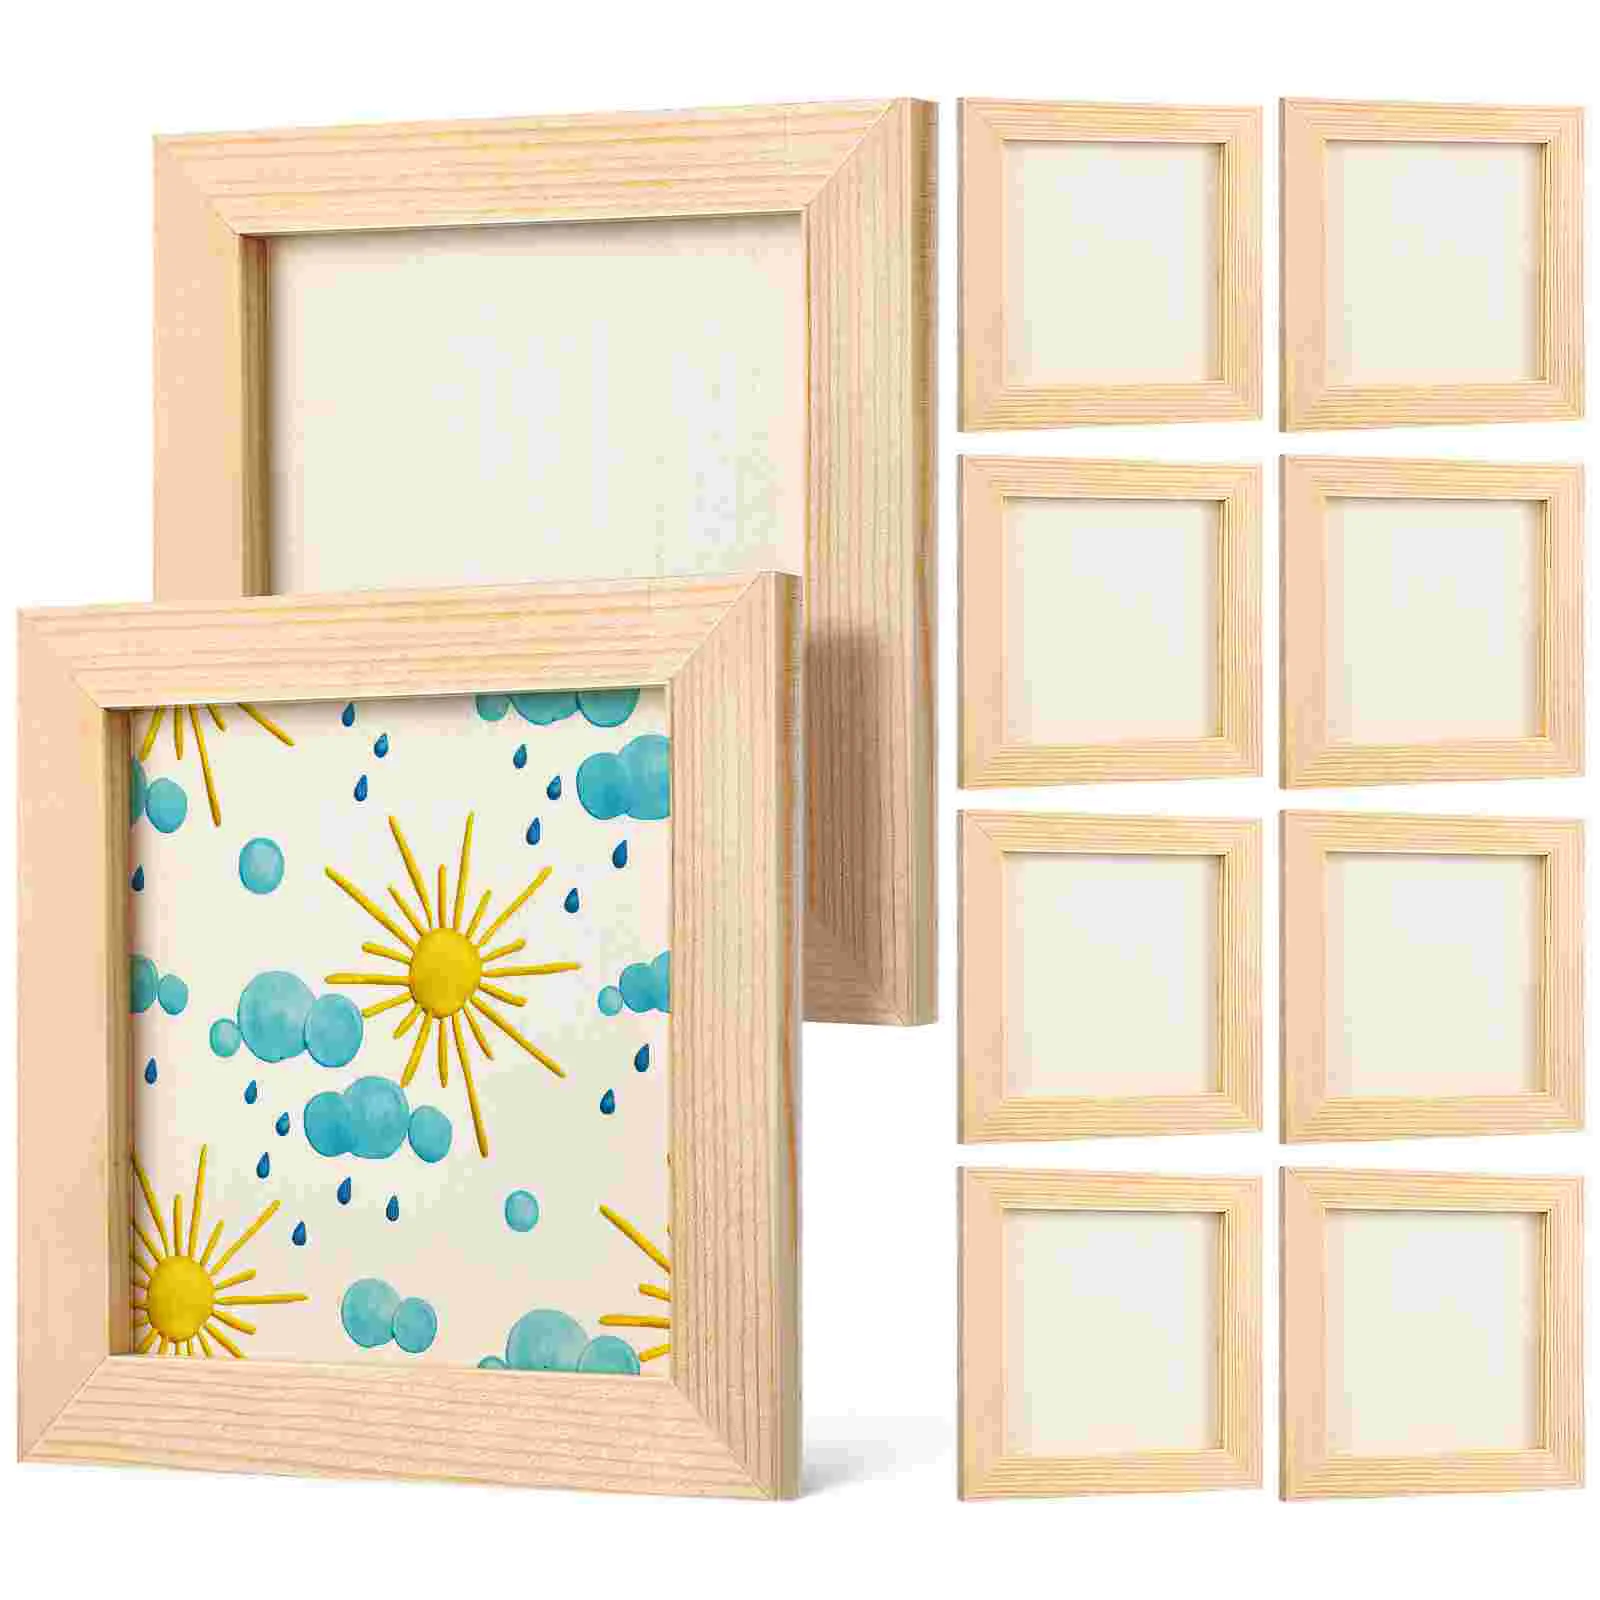 

10 Pcs Unfinished Wooden Picture Frames DIY Photo Frames Wood Photo Frames for Crafts Painting Projects